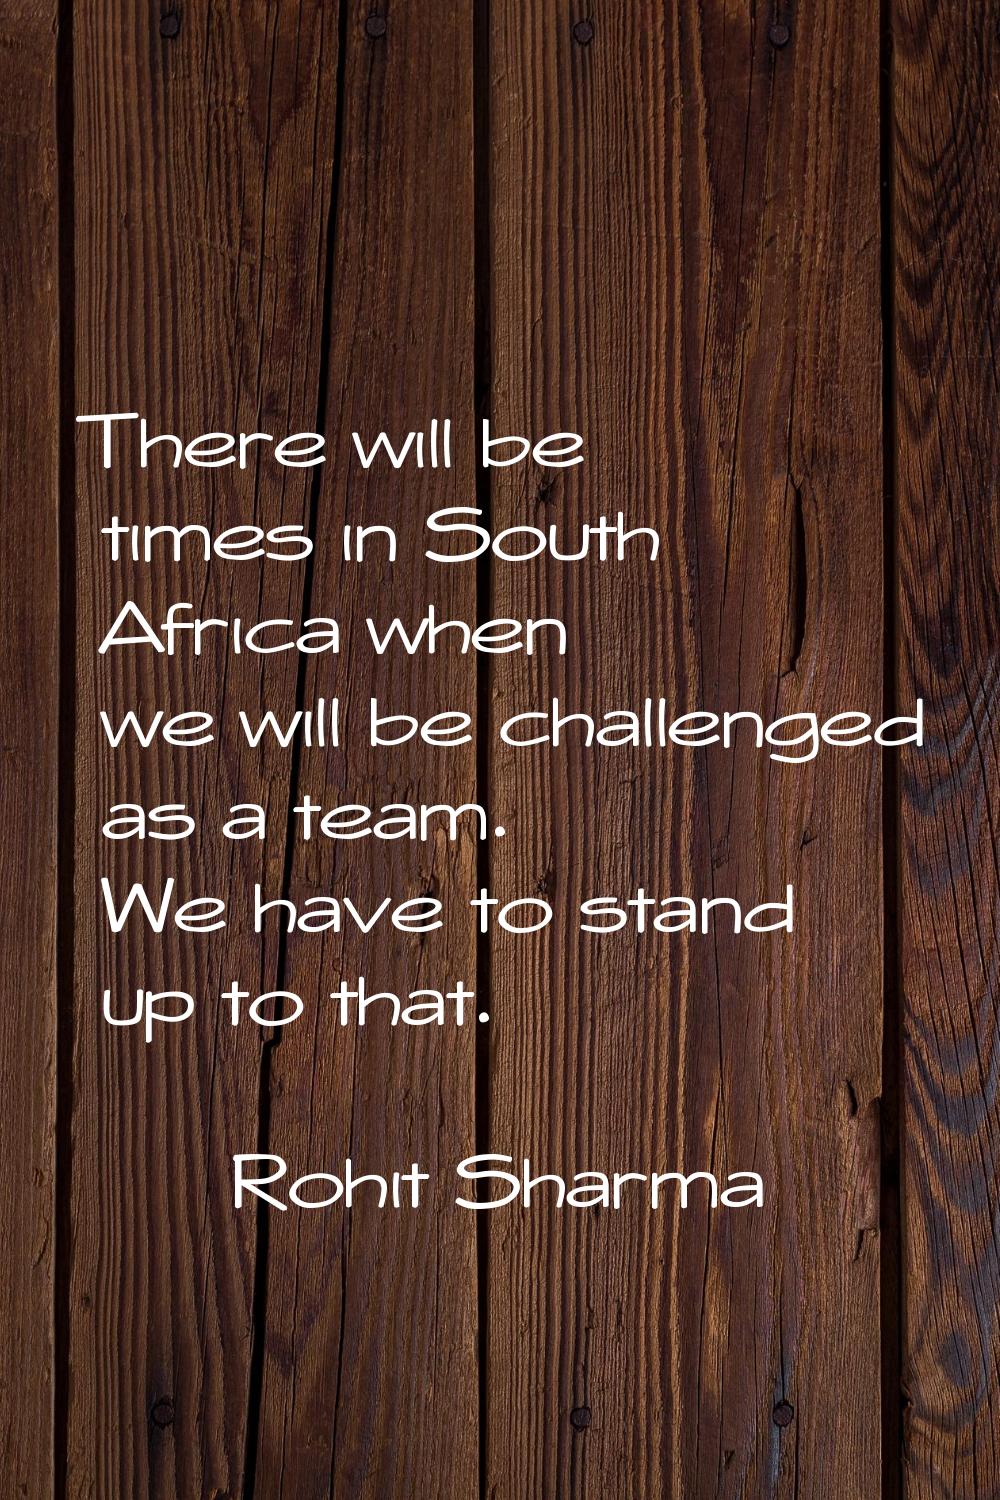 There will be times in South Africa when we will be challenged as a team. We have to stand up to th